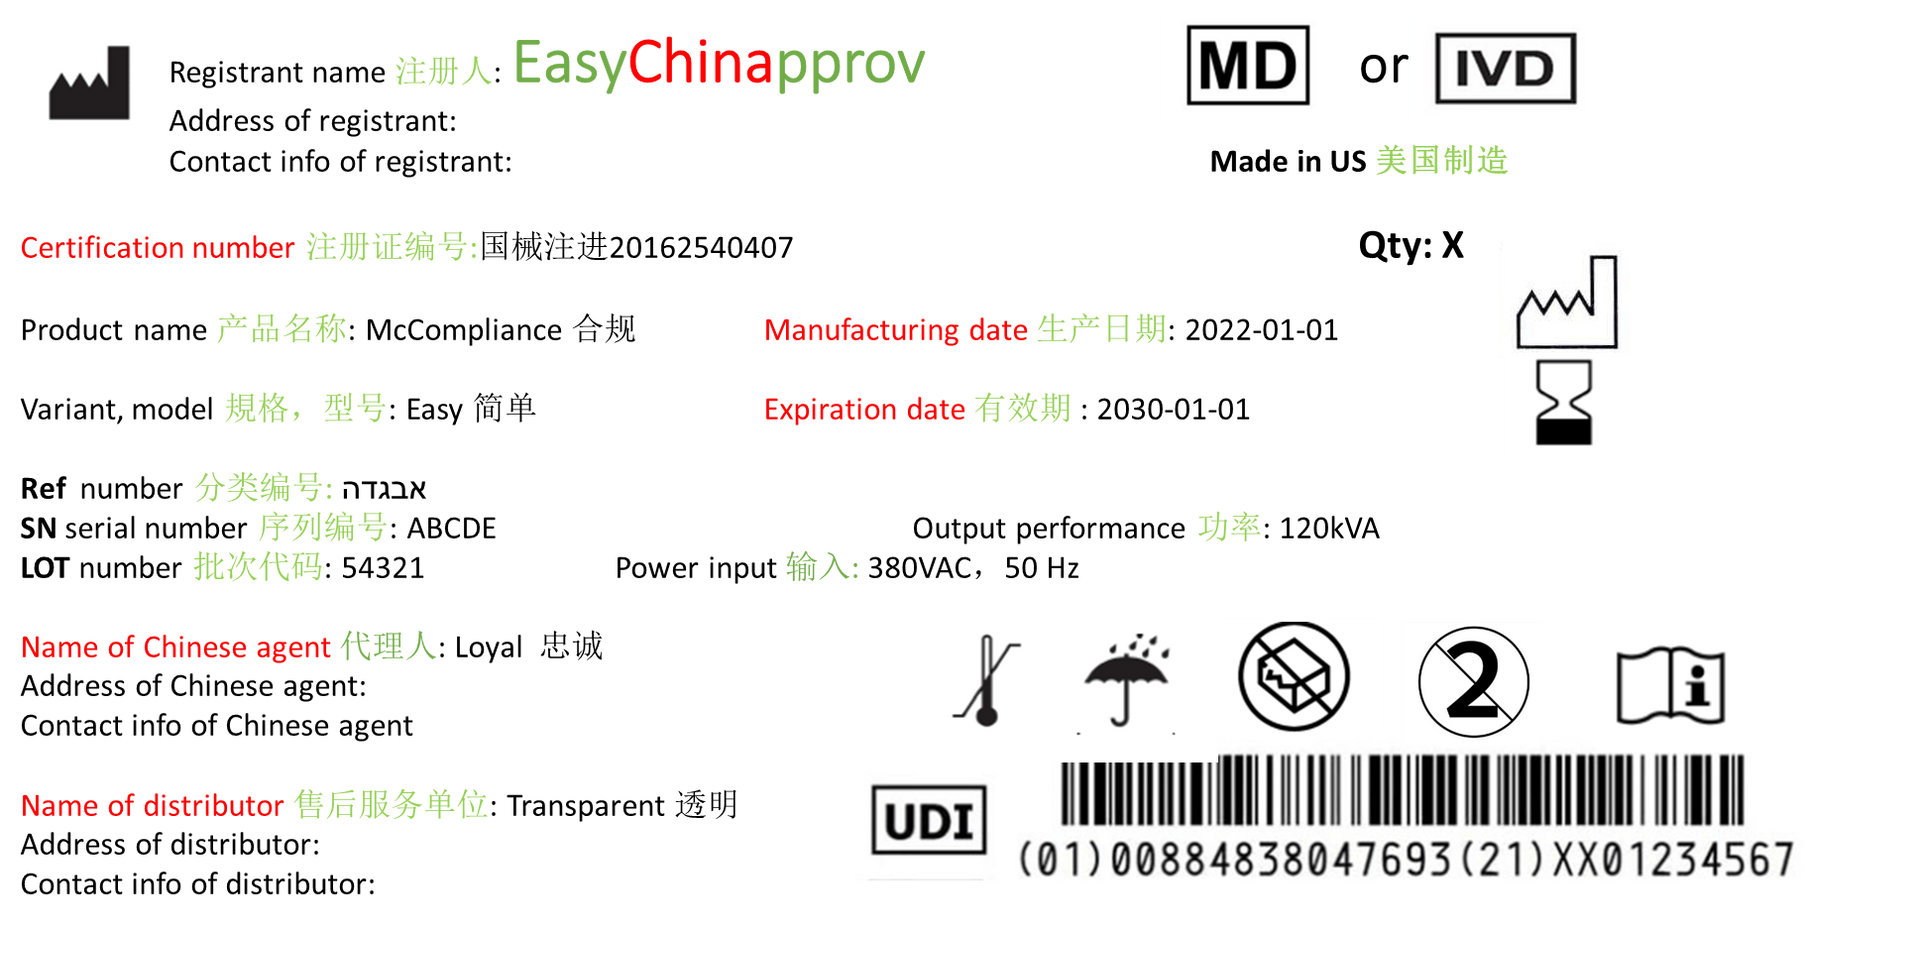 Chinese label of medical device